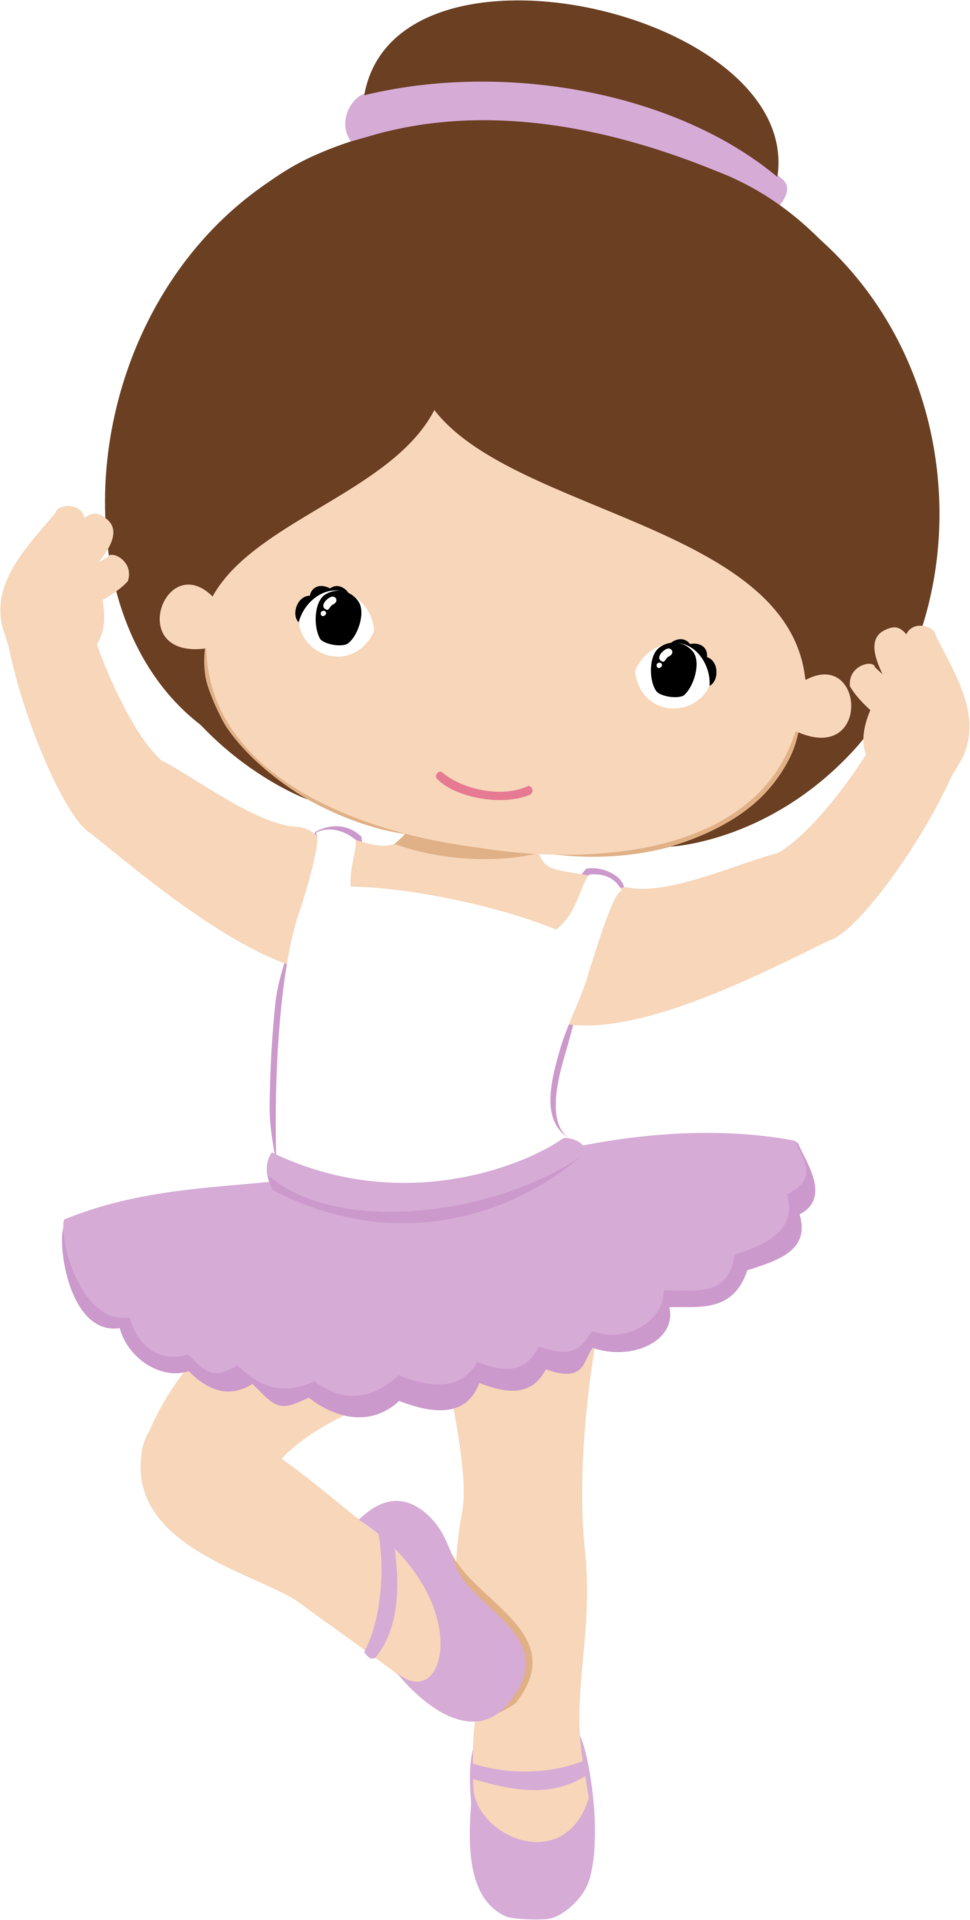 Pin by marina on. Dancer clipart baby